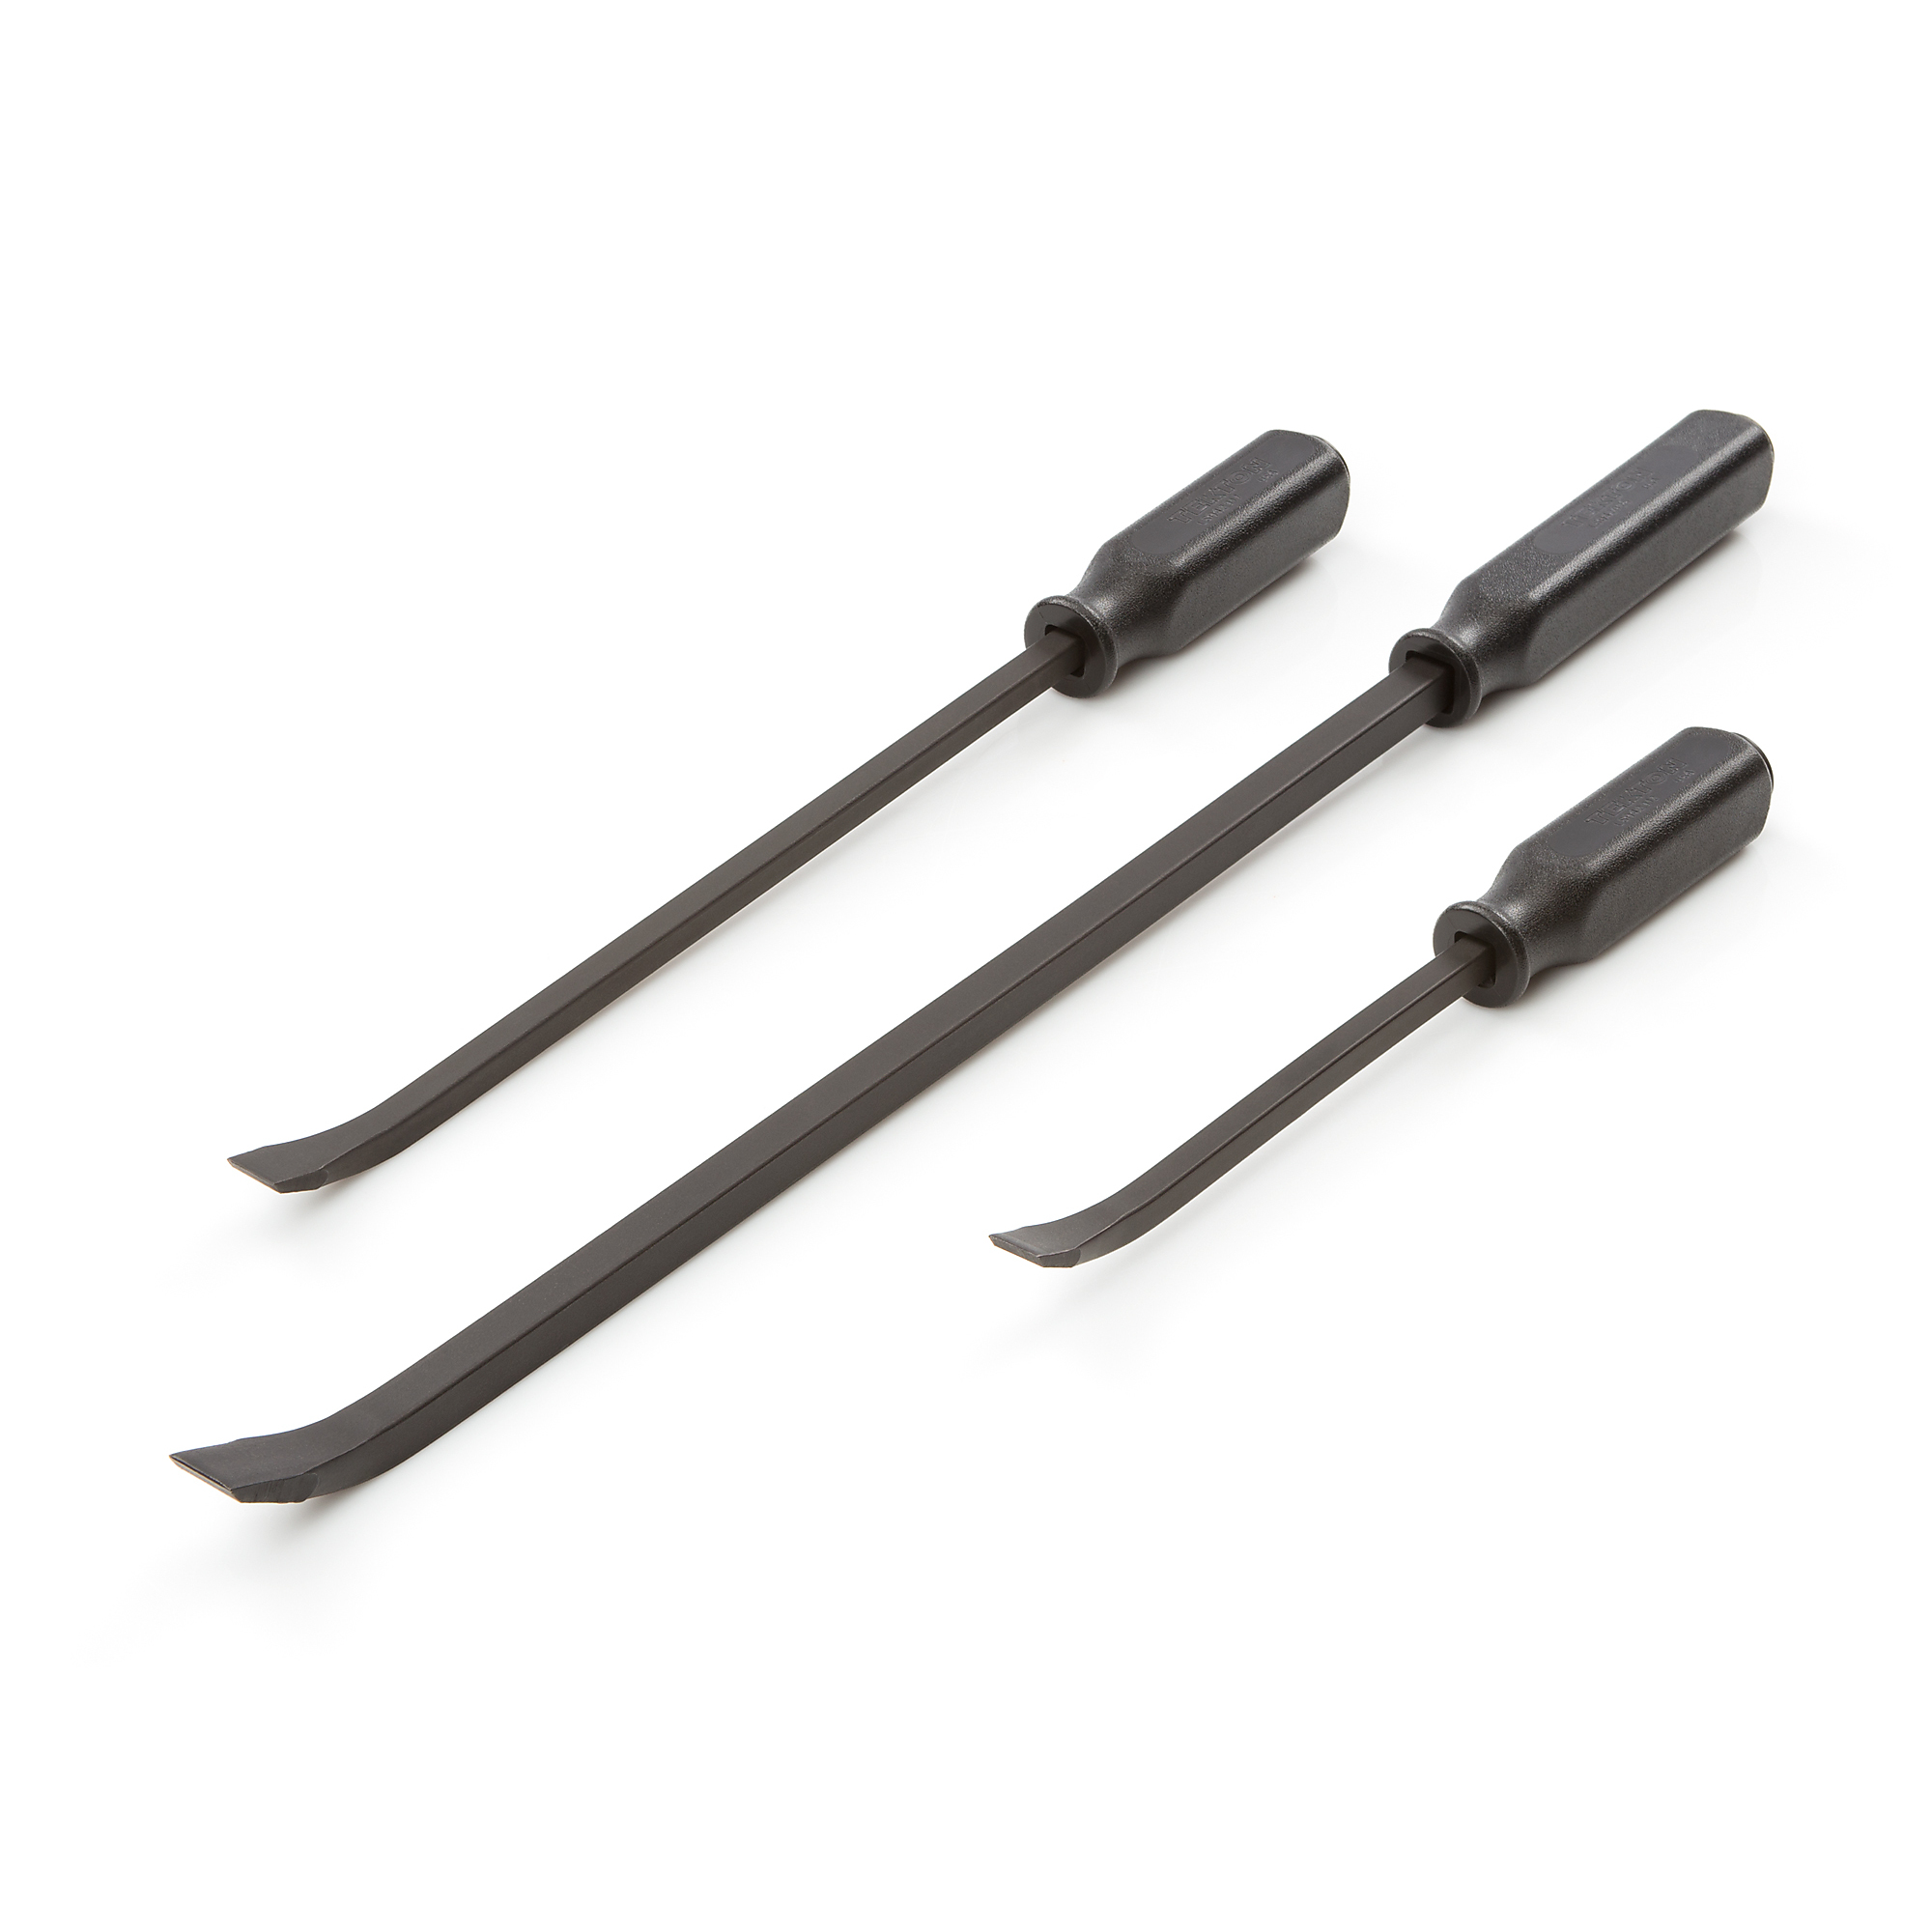 Tekton, 3-Piece Angled End Handled Pry Bar Set, Material Steel, Pieces (qty.) 3 Model LSQ42103